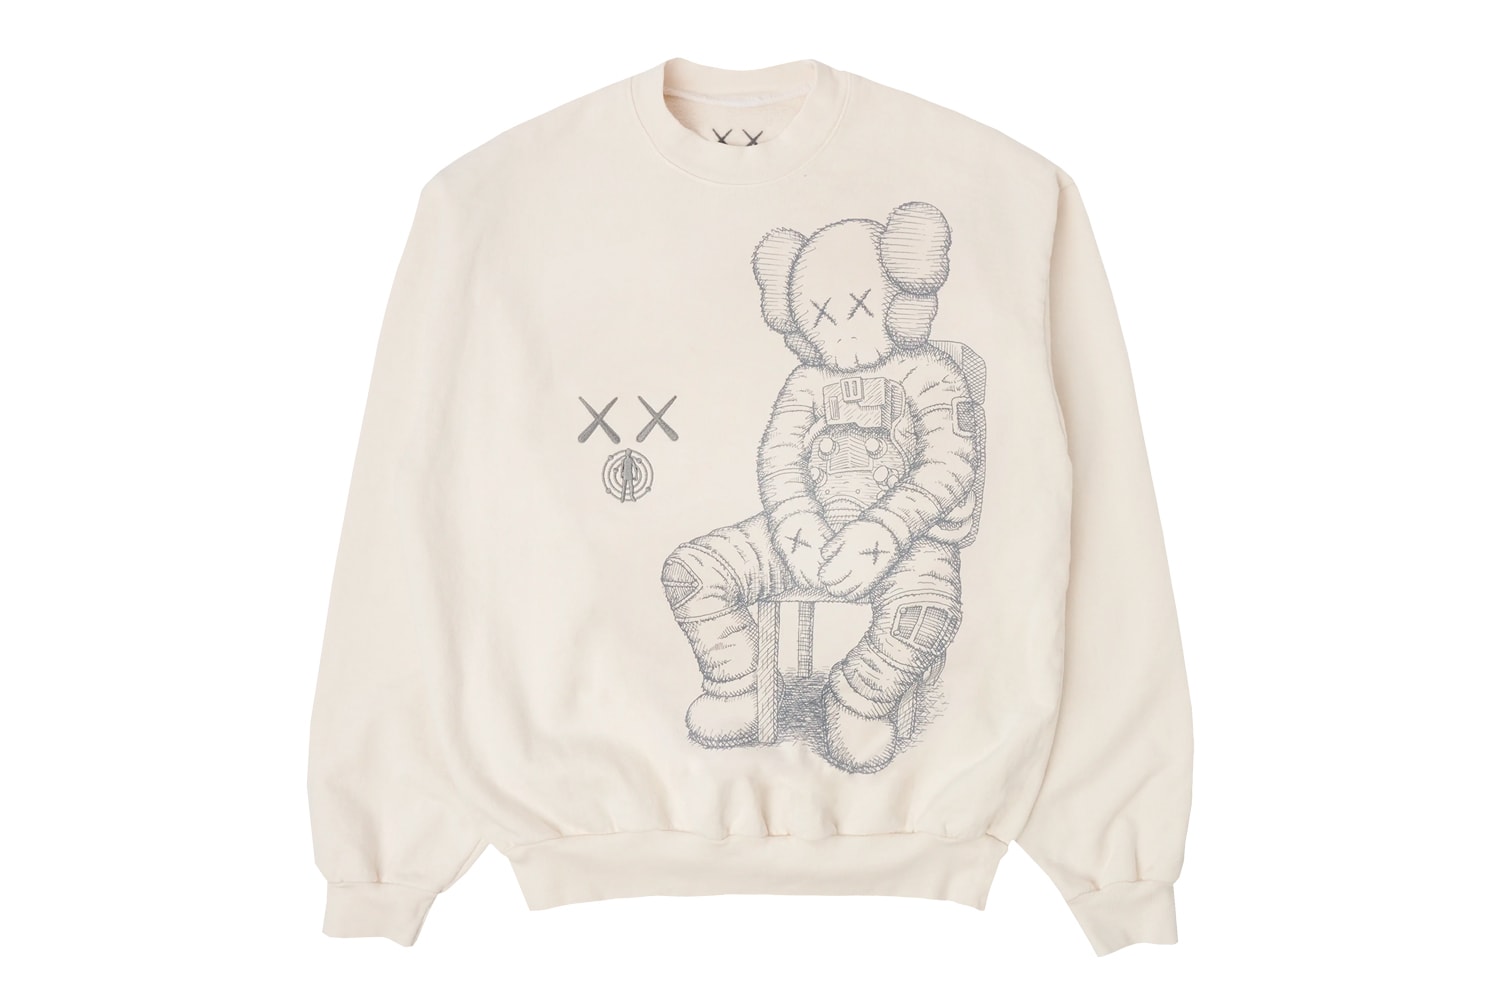 KAWS Kid Cudi Man on the Moon Trilogy Box Set Merch Release Info Buy Price Man on the Moon II: The Legend of Mr. Rager The End of Day The Chosen